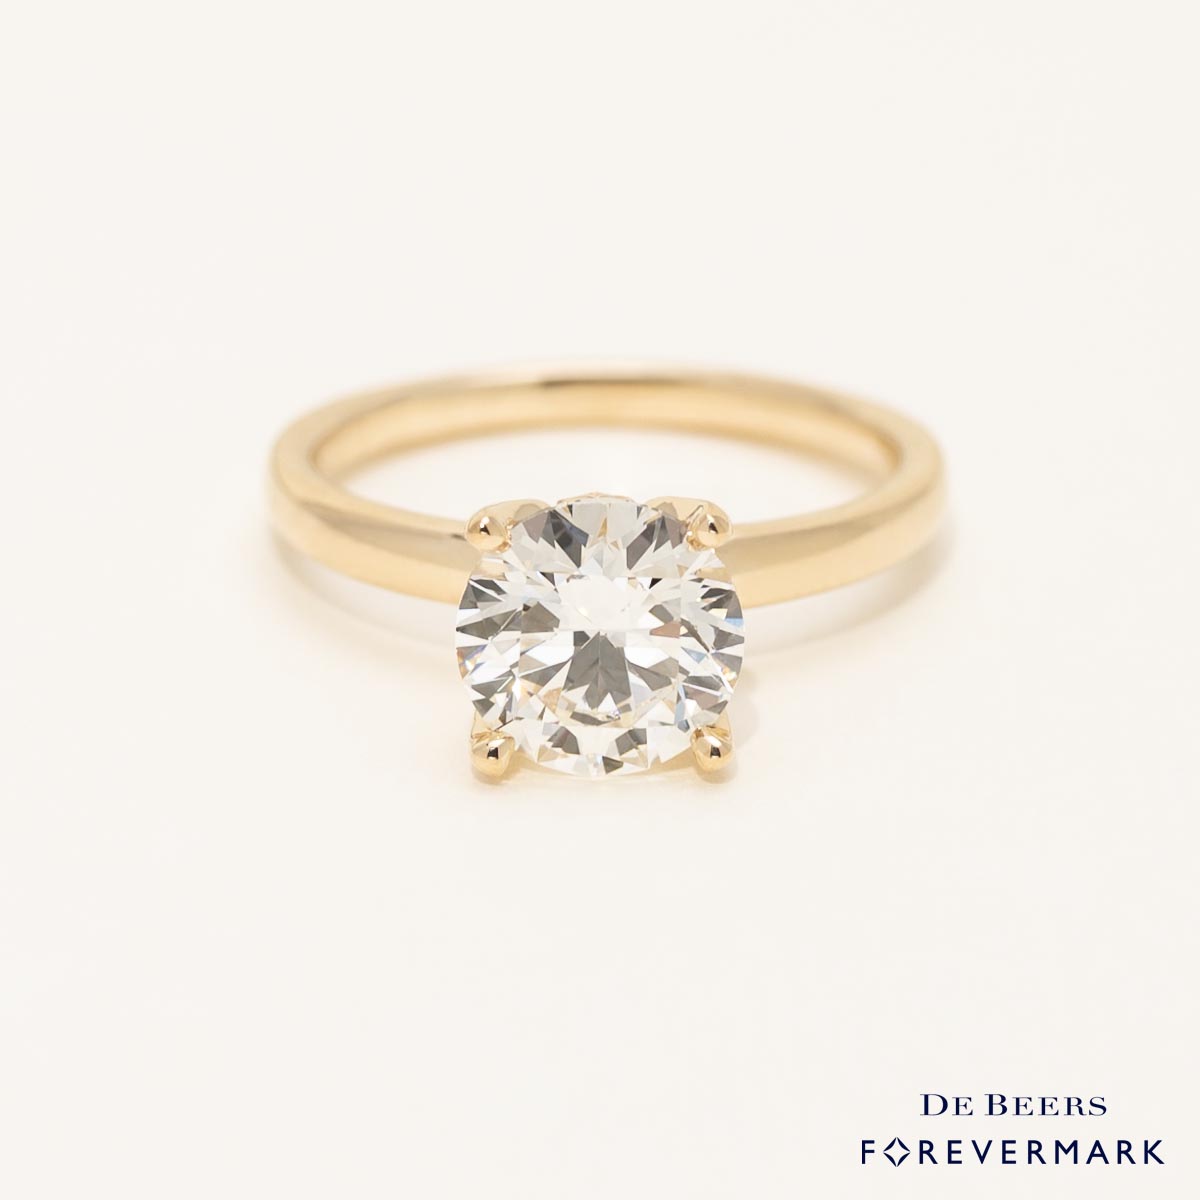 De Beers Forevermark Diamond Solitaire Engagement Ring in 14kt Yellow Gold (2ct tw)